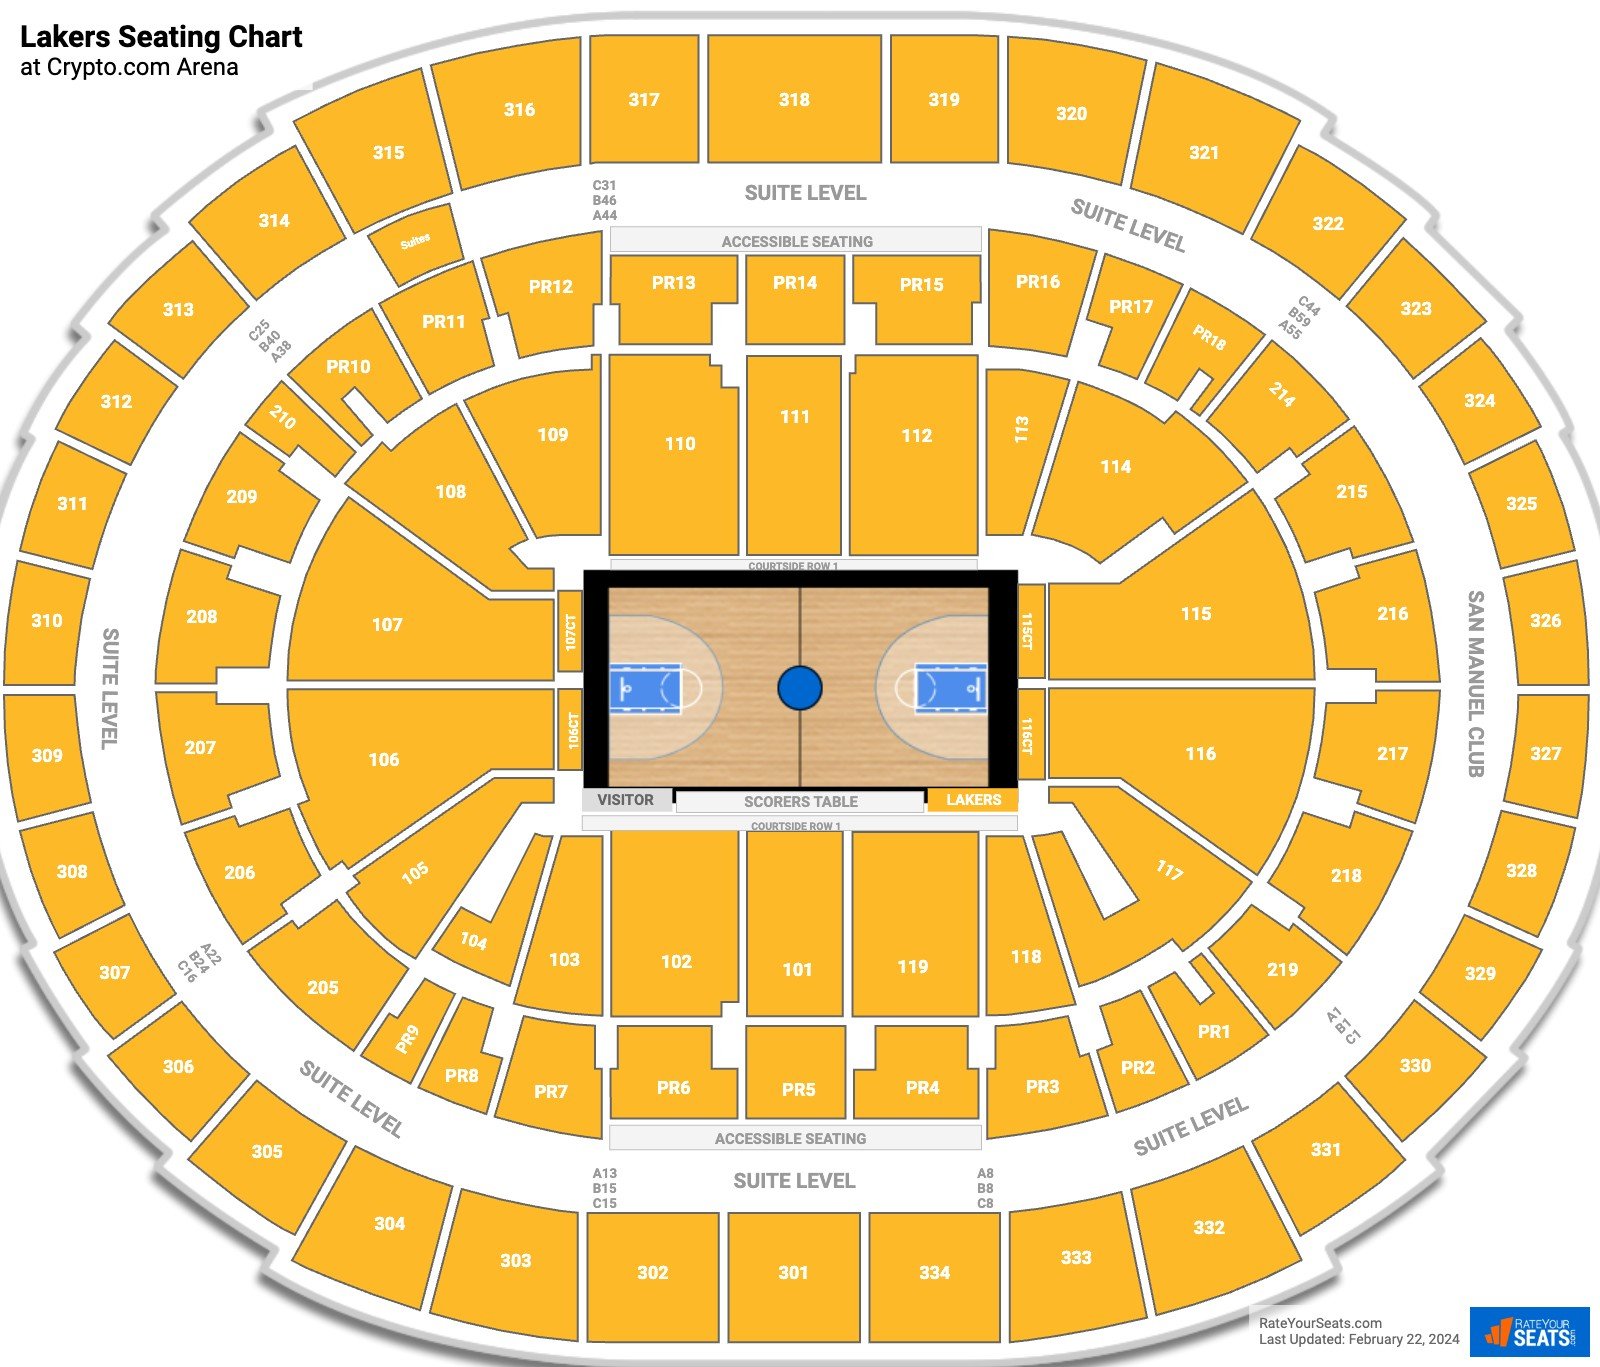 Los Angeles Lakers Seating Chart at Crypto.com Arena